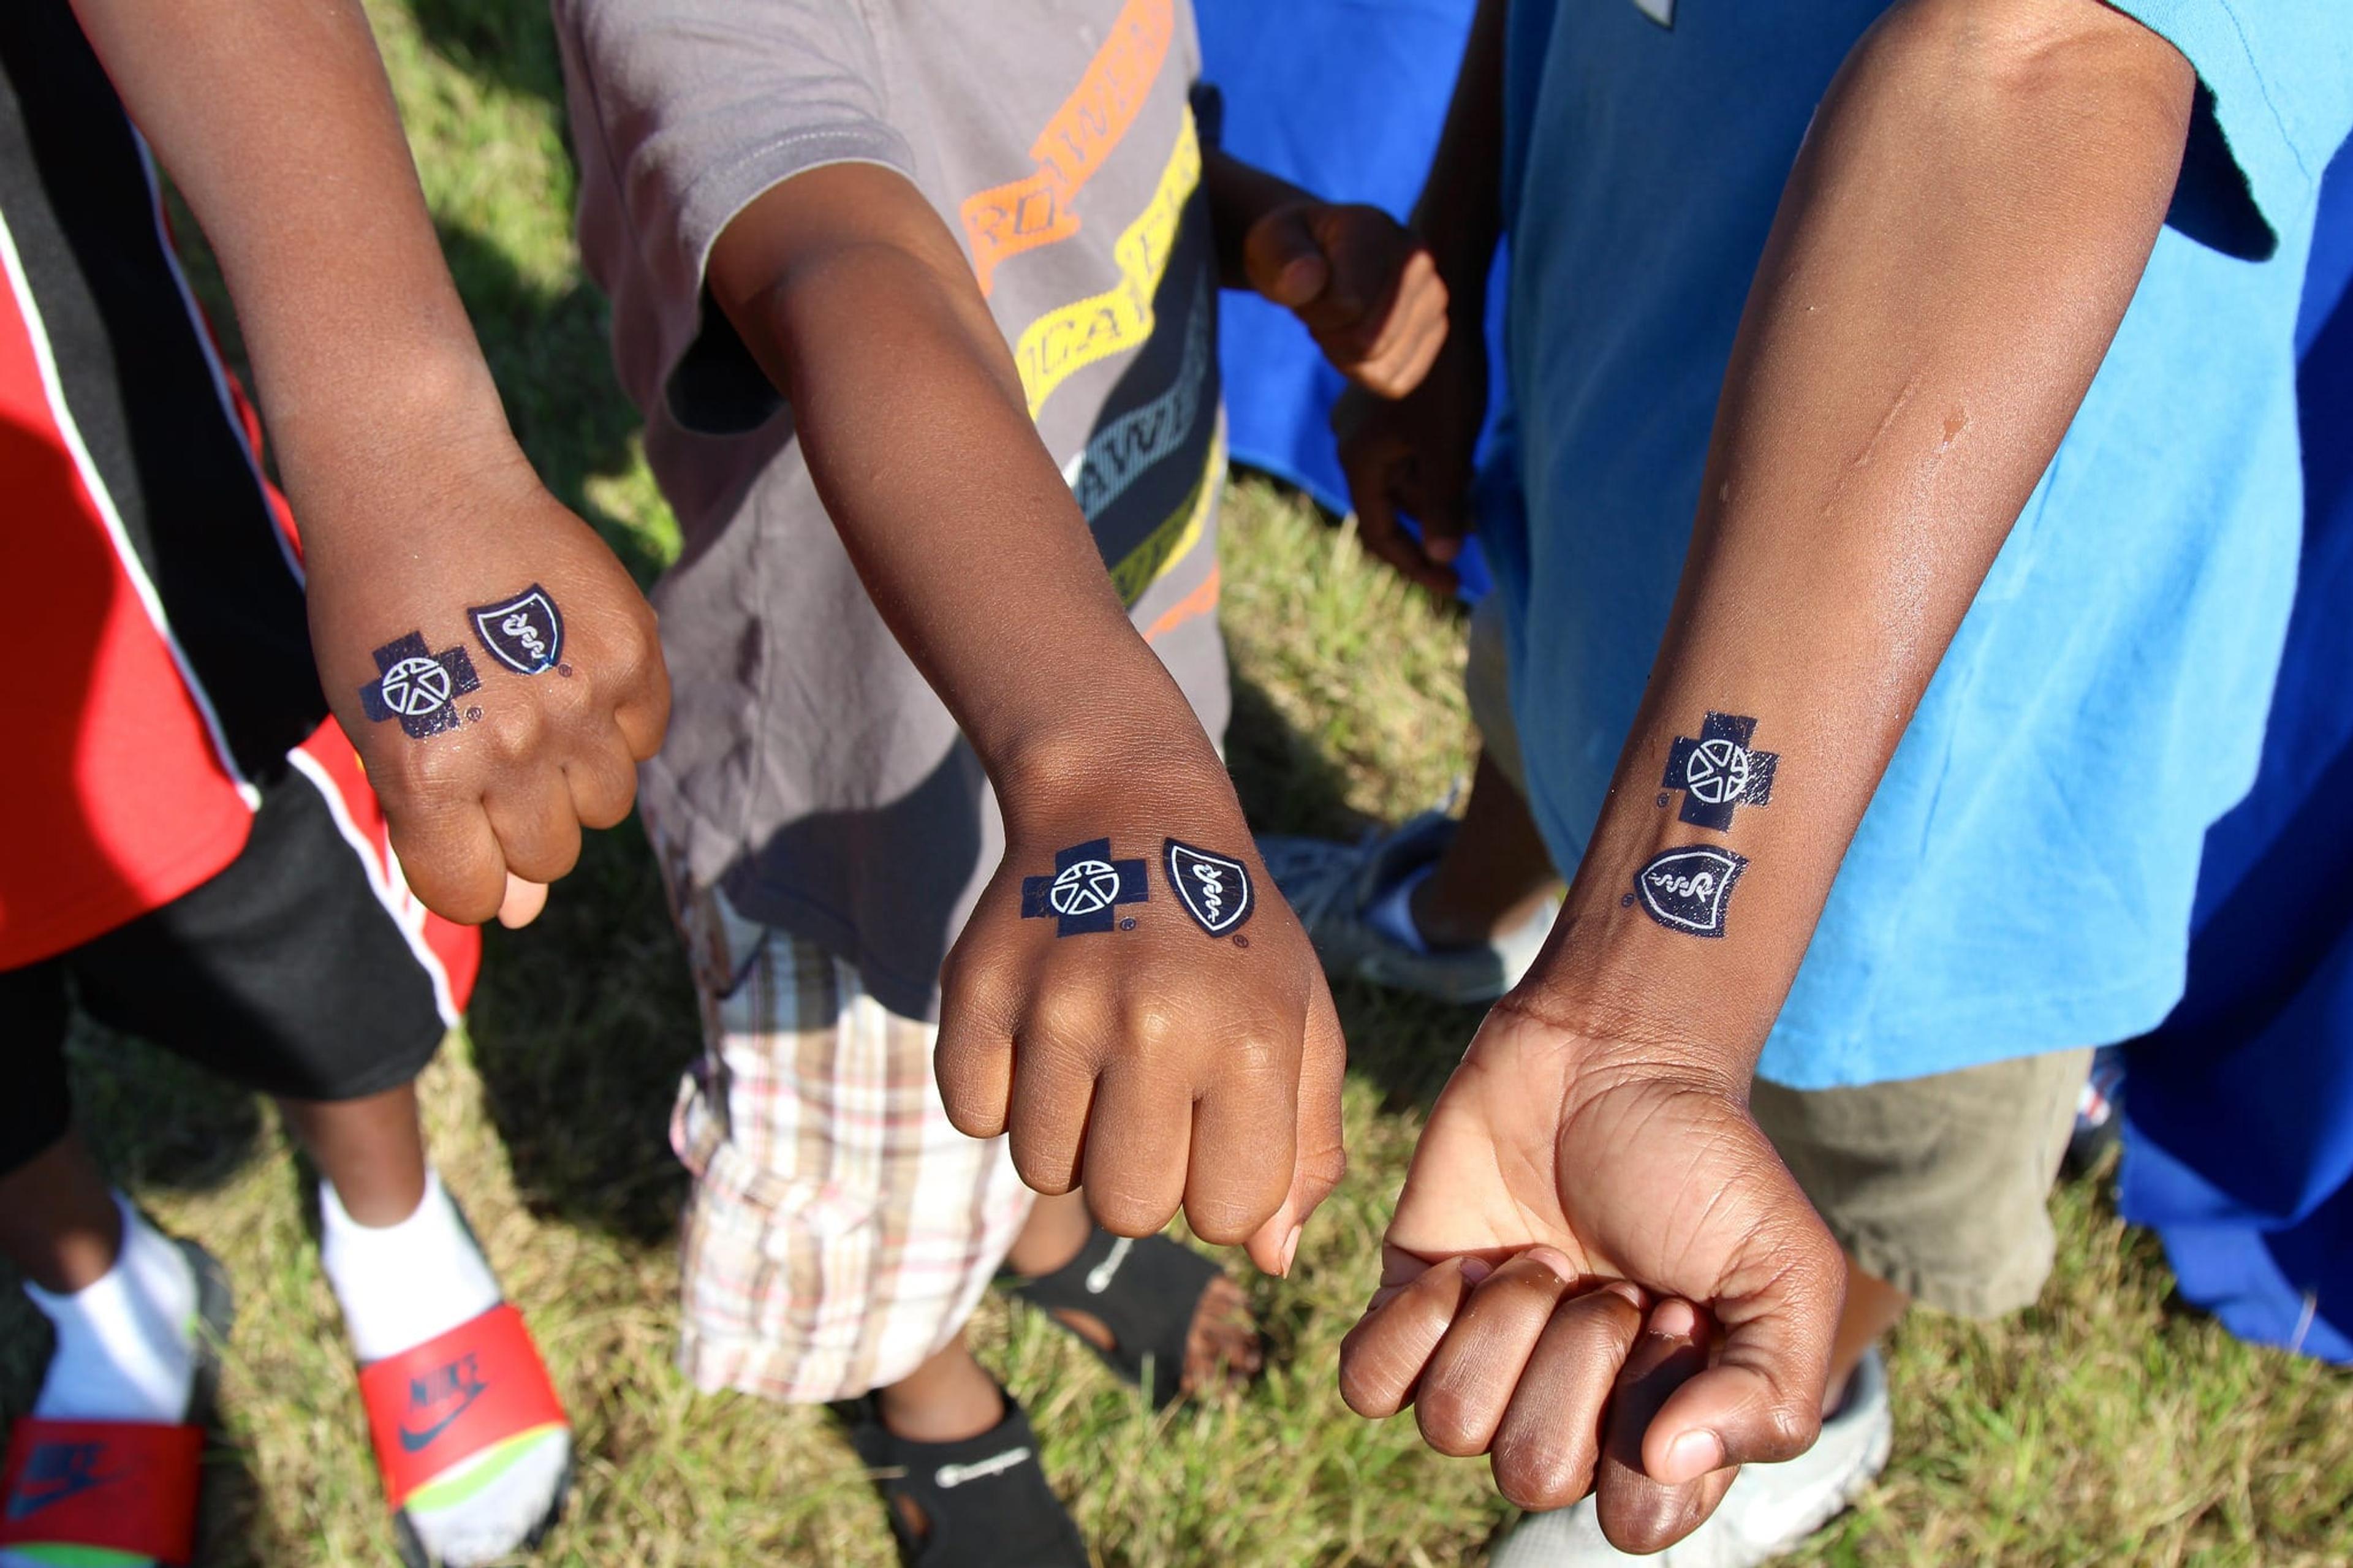 Photo depicts three young people's hands and arms with Blue Cross Blue Shield of Michigan temporary tattoos displayed.